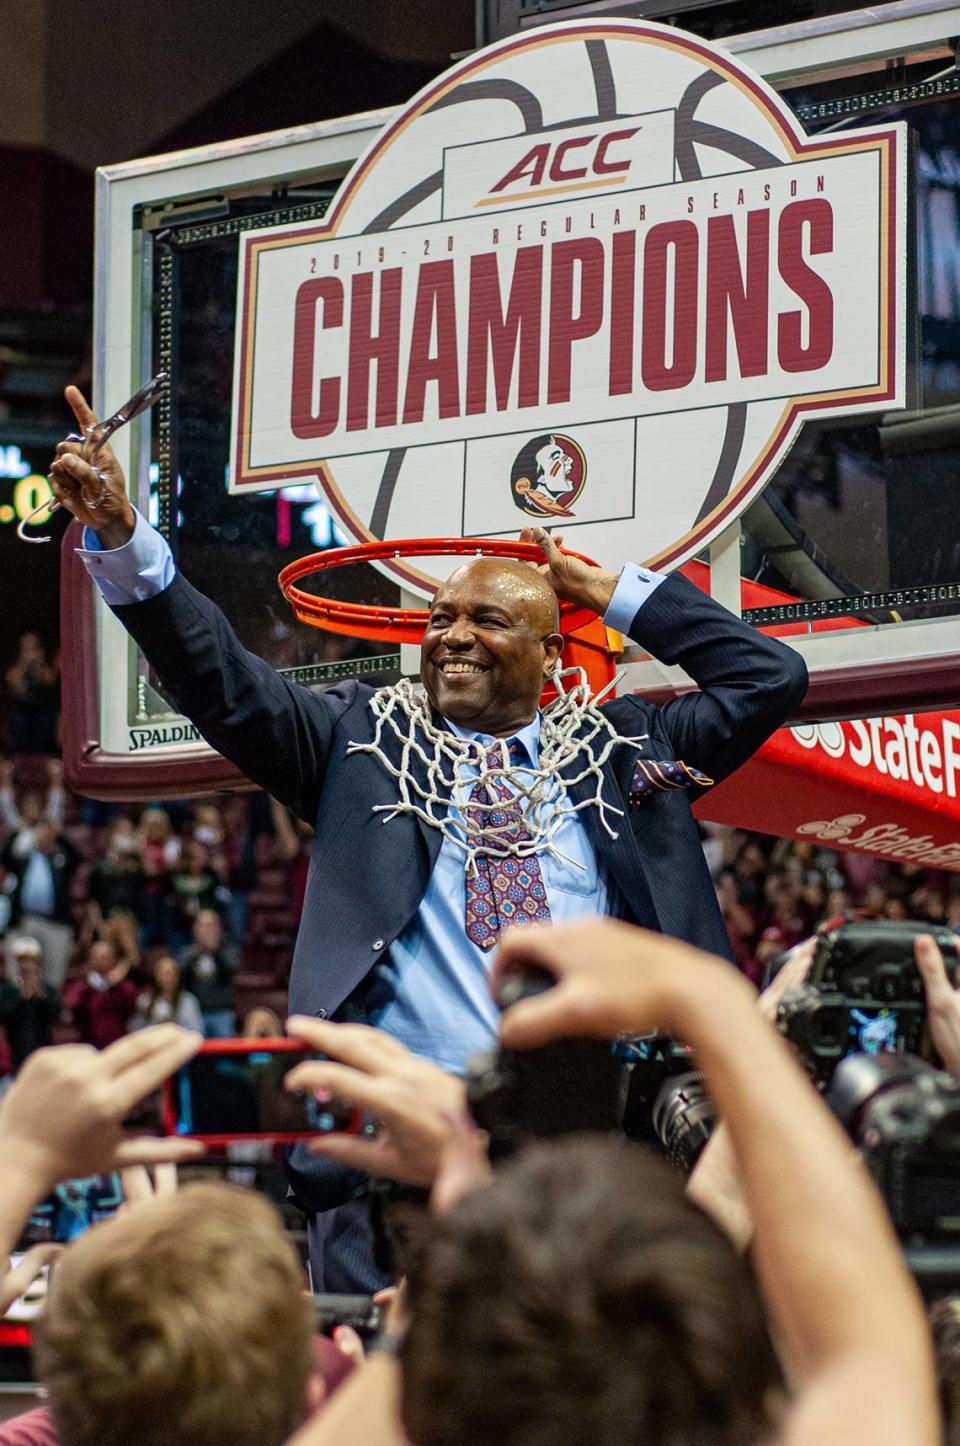 Florida State coach Leonard Hamilton celebrates an ACC championship. Hamilton, who grew up in Gastonia, N.C., has had a coaching career spanning more than 50 years and has been the Seminoles’ head coach since 2002.